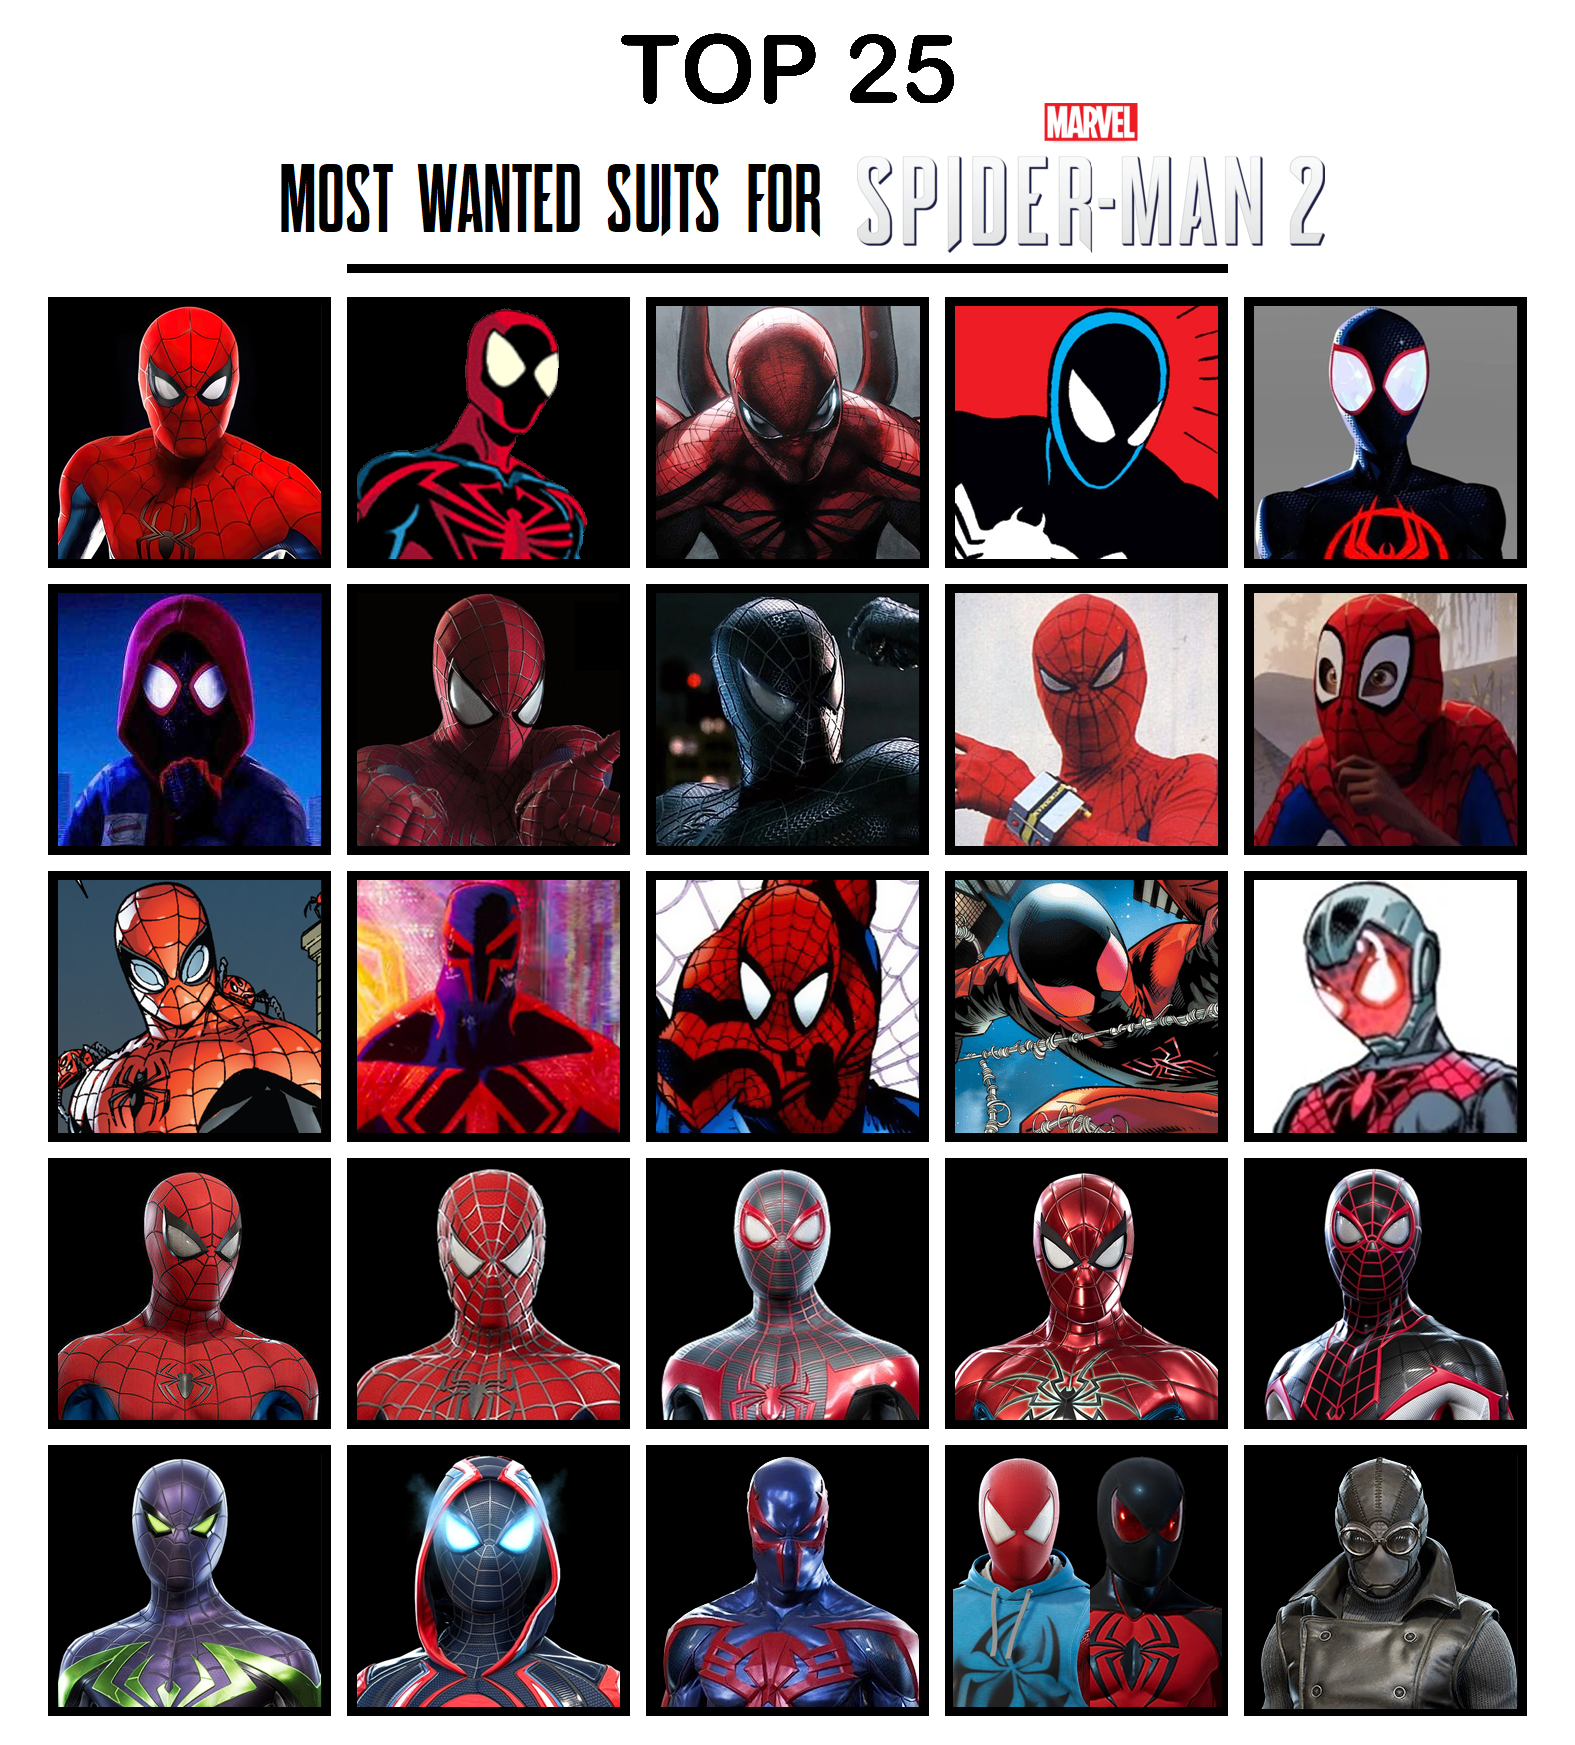 Every Unlockable Suit in Marvel's Spider-Man 2